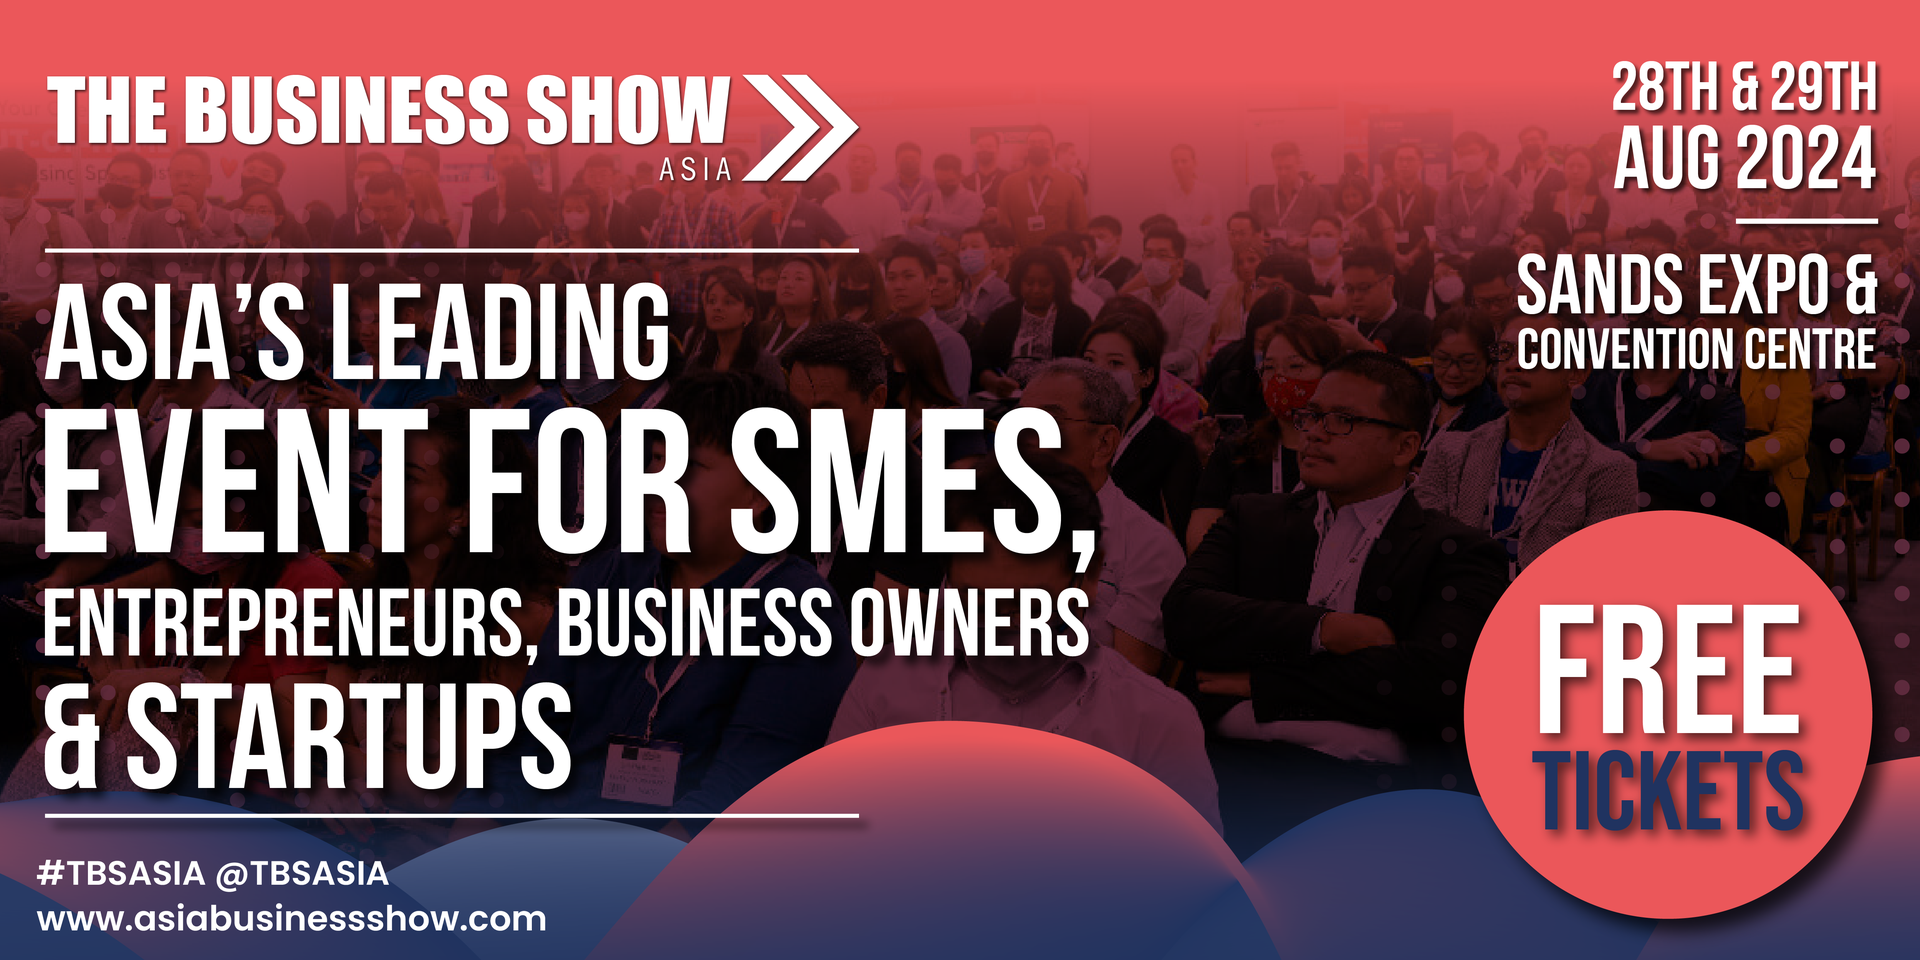 thumbnails The Business Show Asia 2024